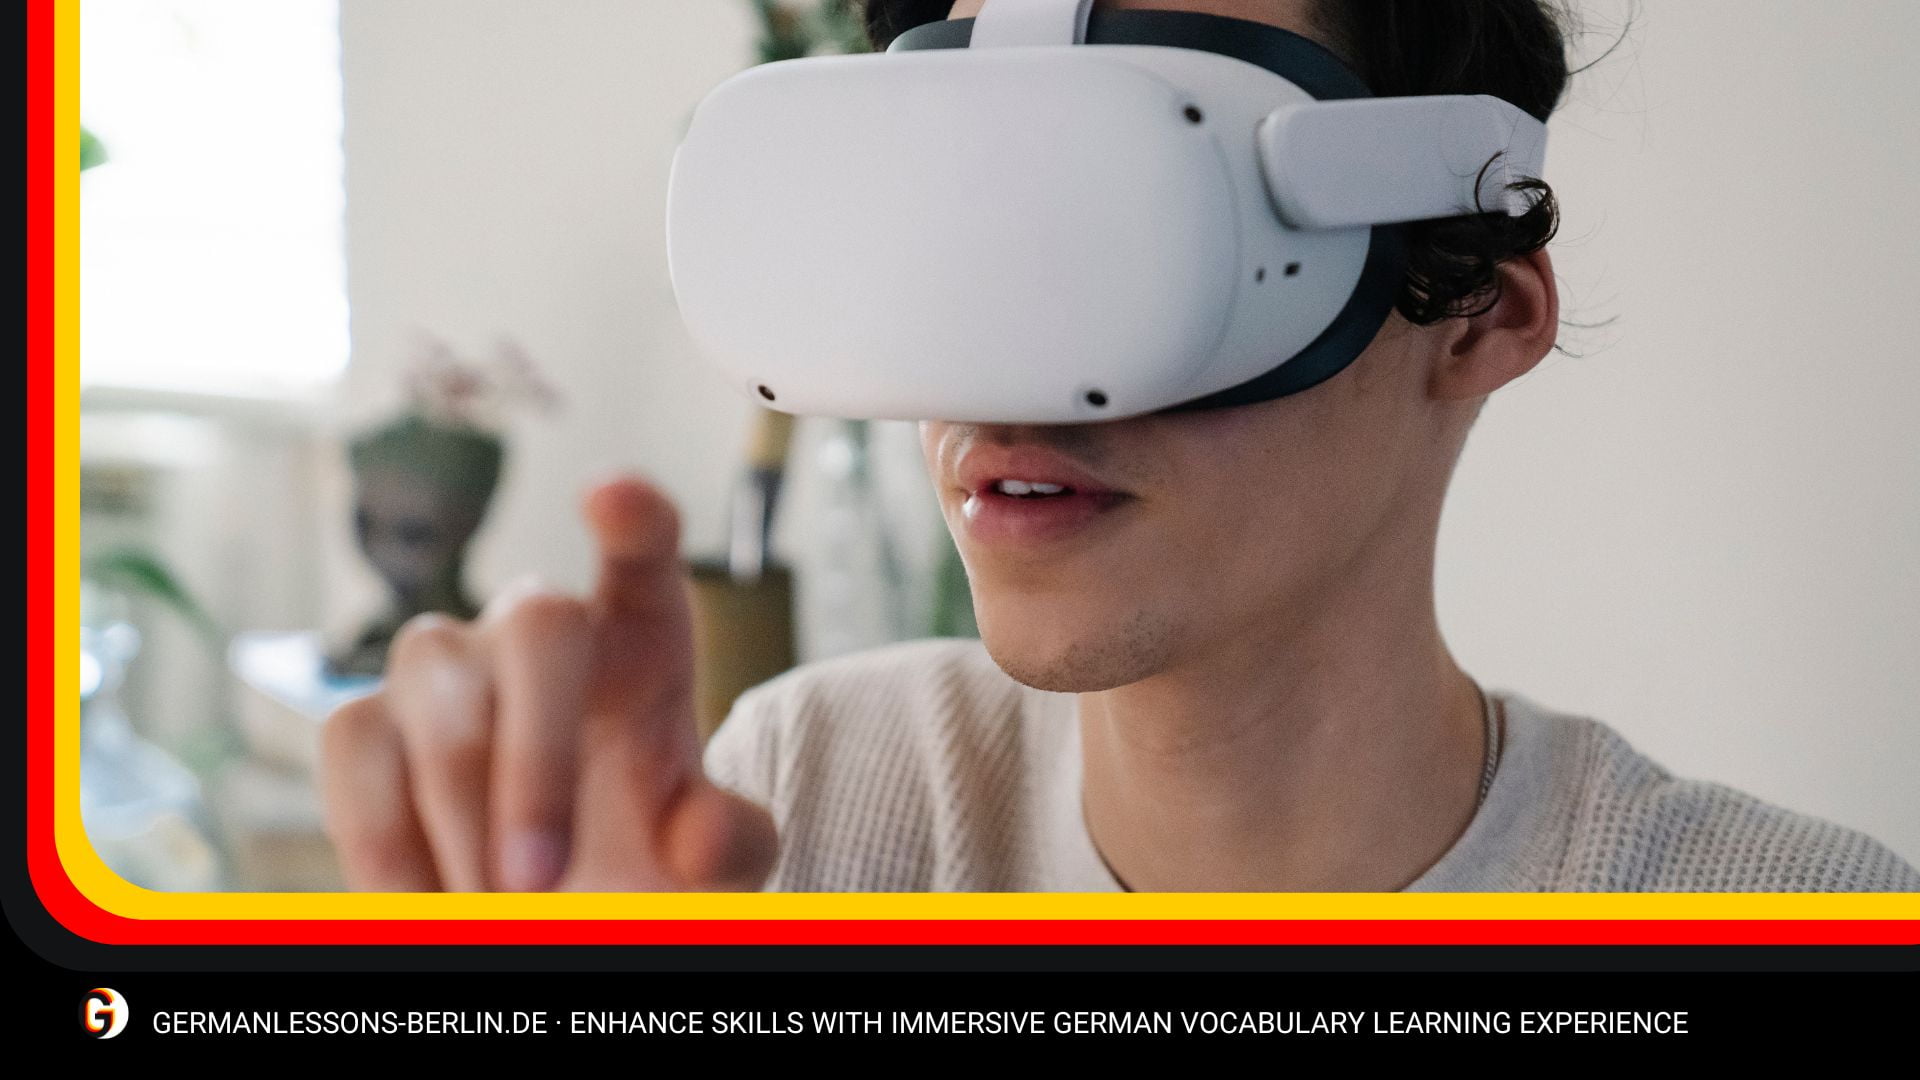 Enhance Skills with Immersive German Vocabulary Learning Experience